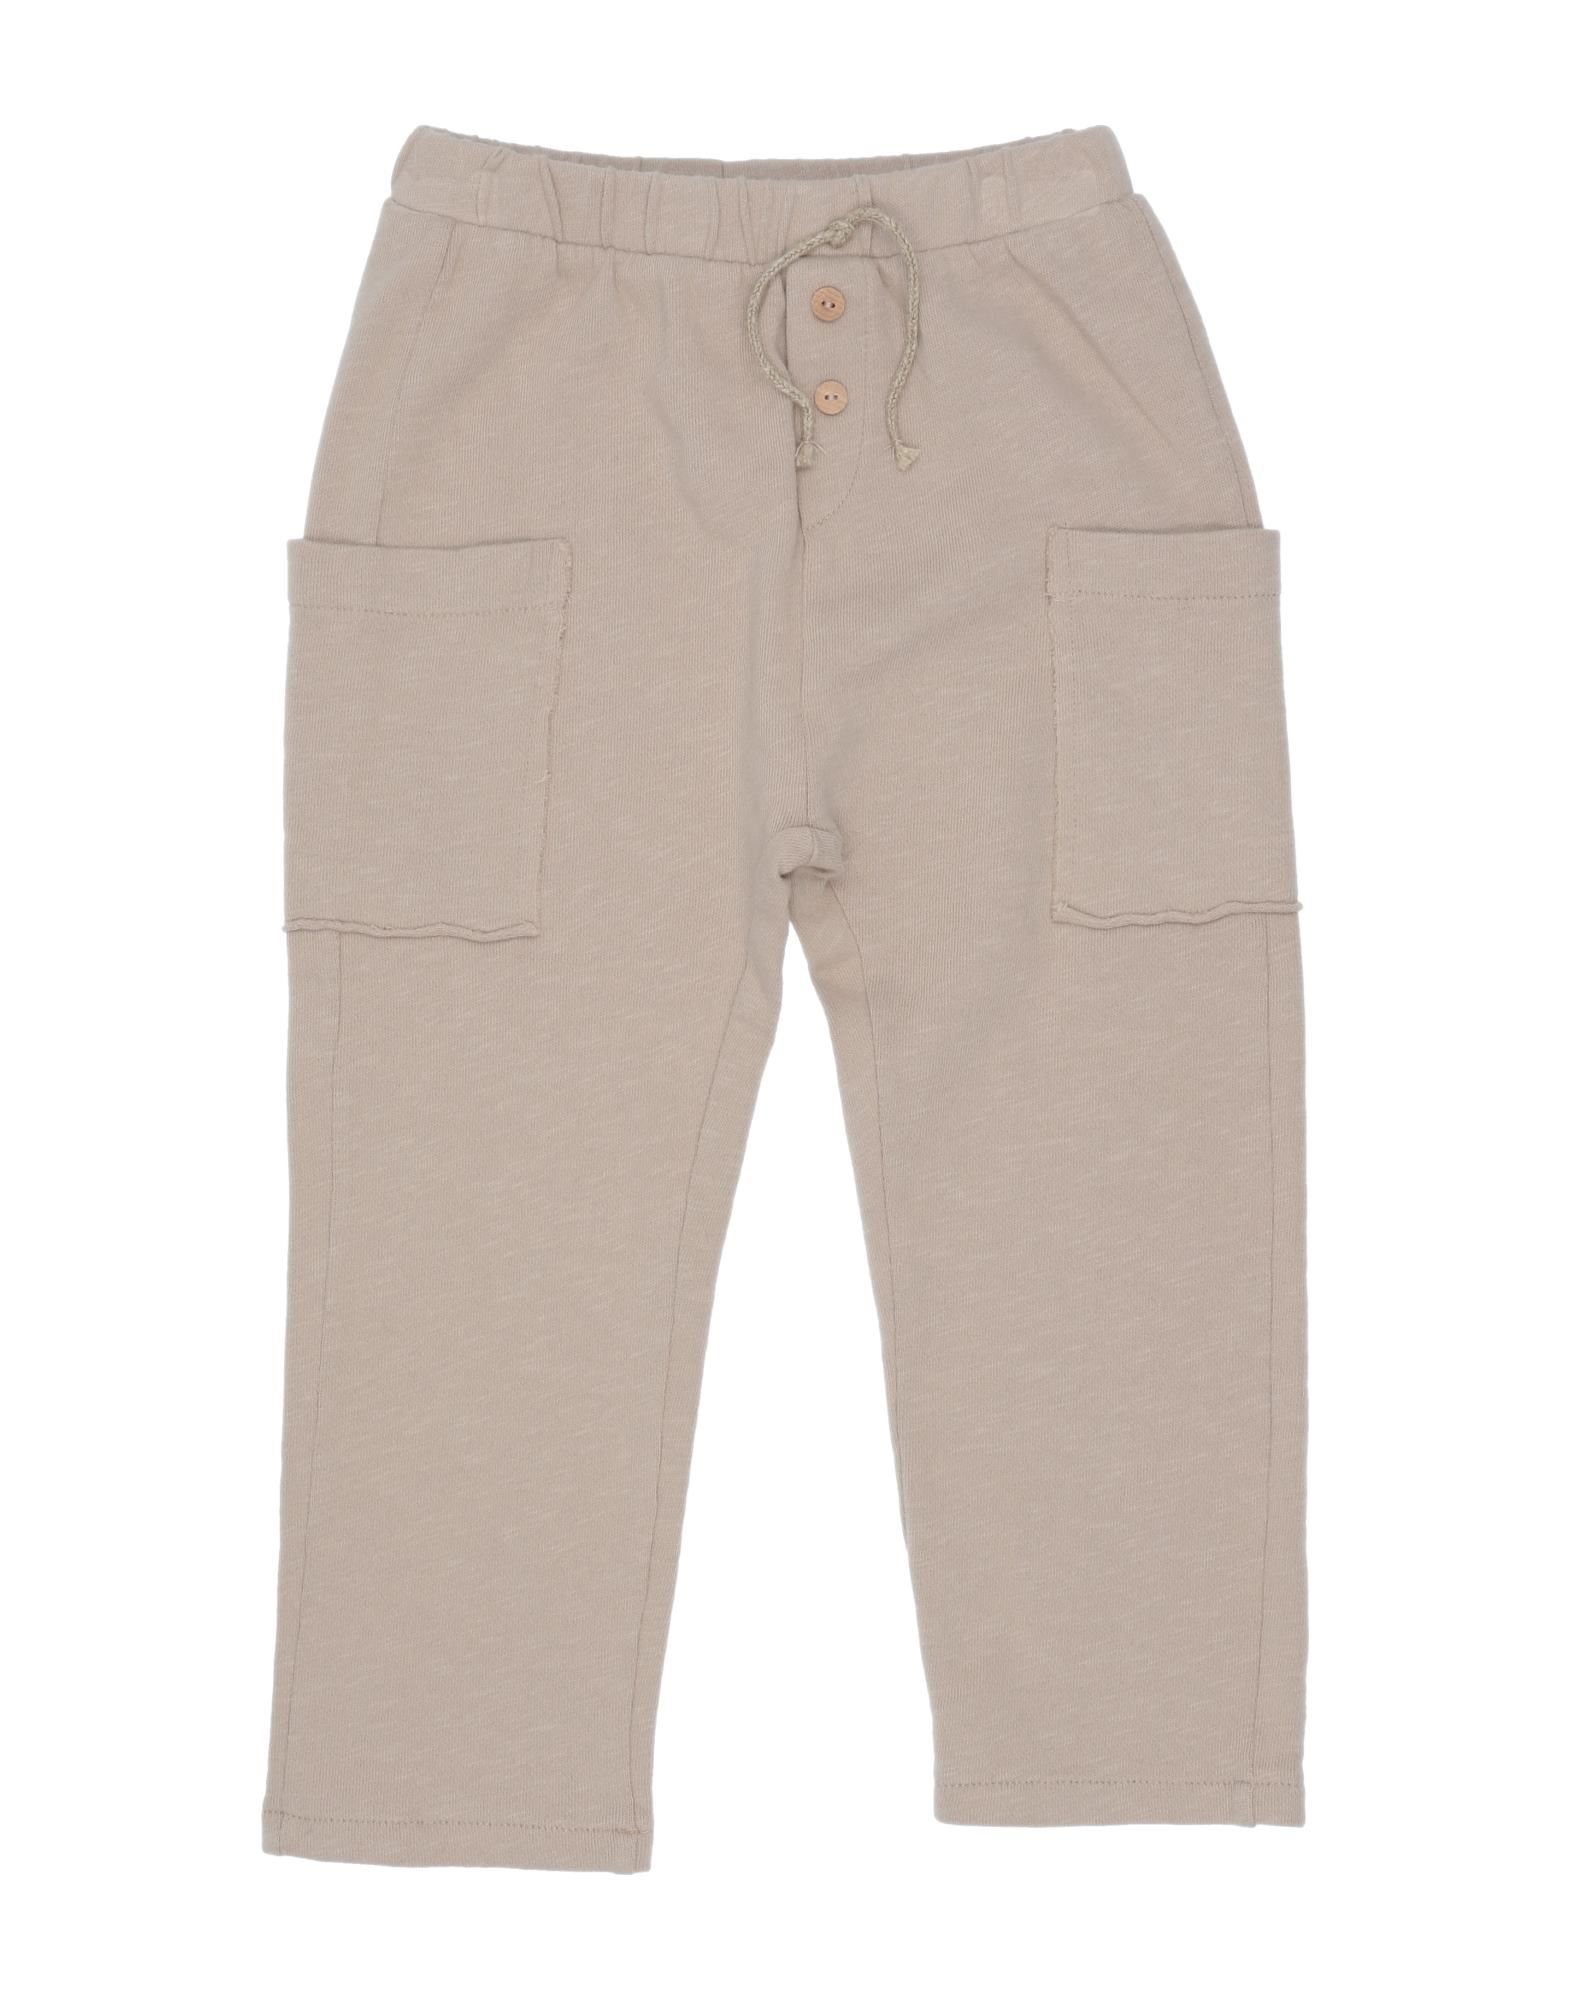 PLAY UP Casual pants - Item 13542126